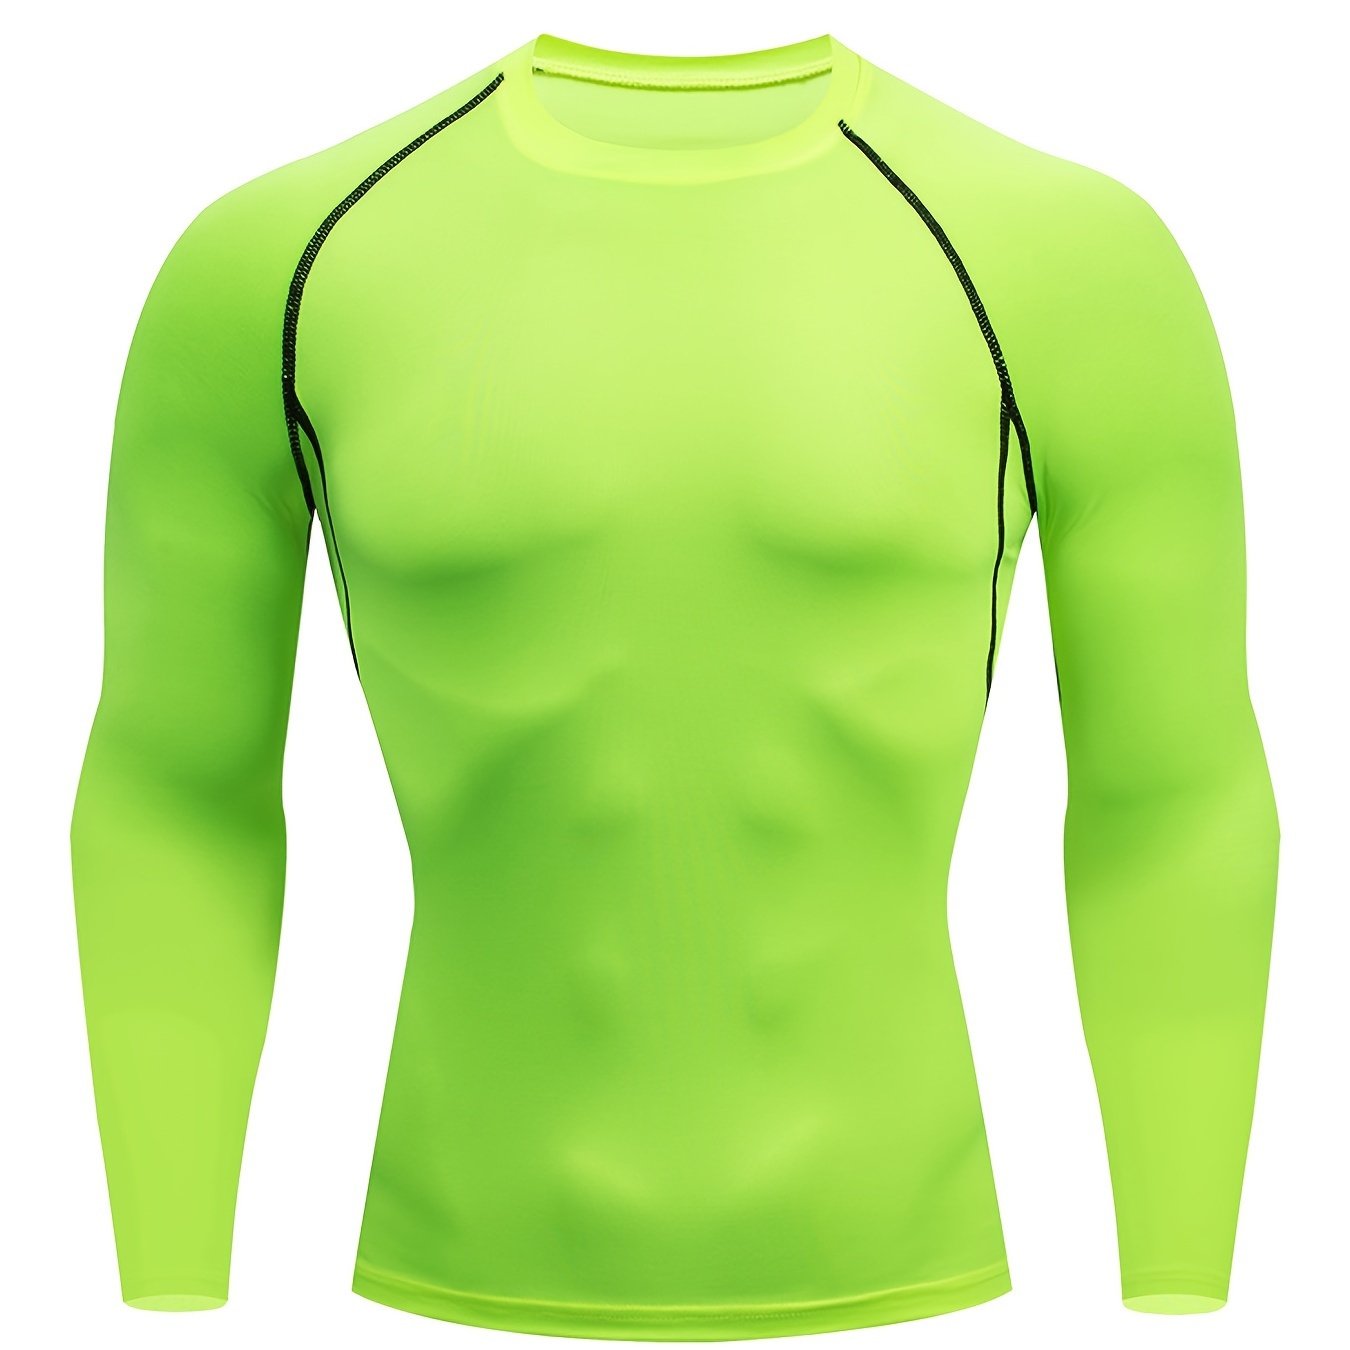 

Quick-dry Men's Compression Shirt - Fluorescent Green Athletic Base Layer For Workouts And Sports